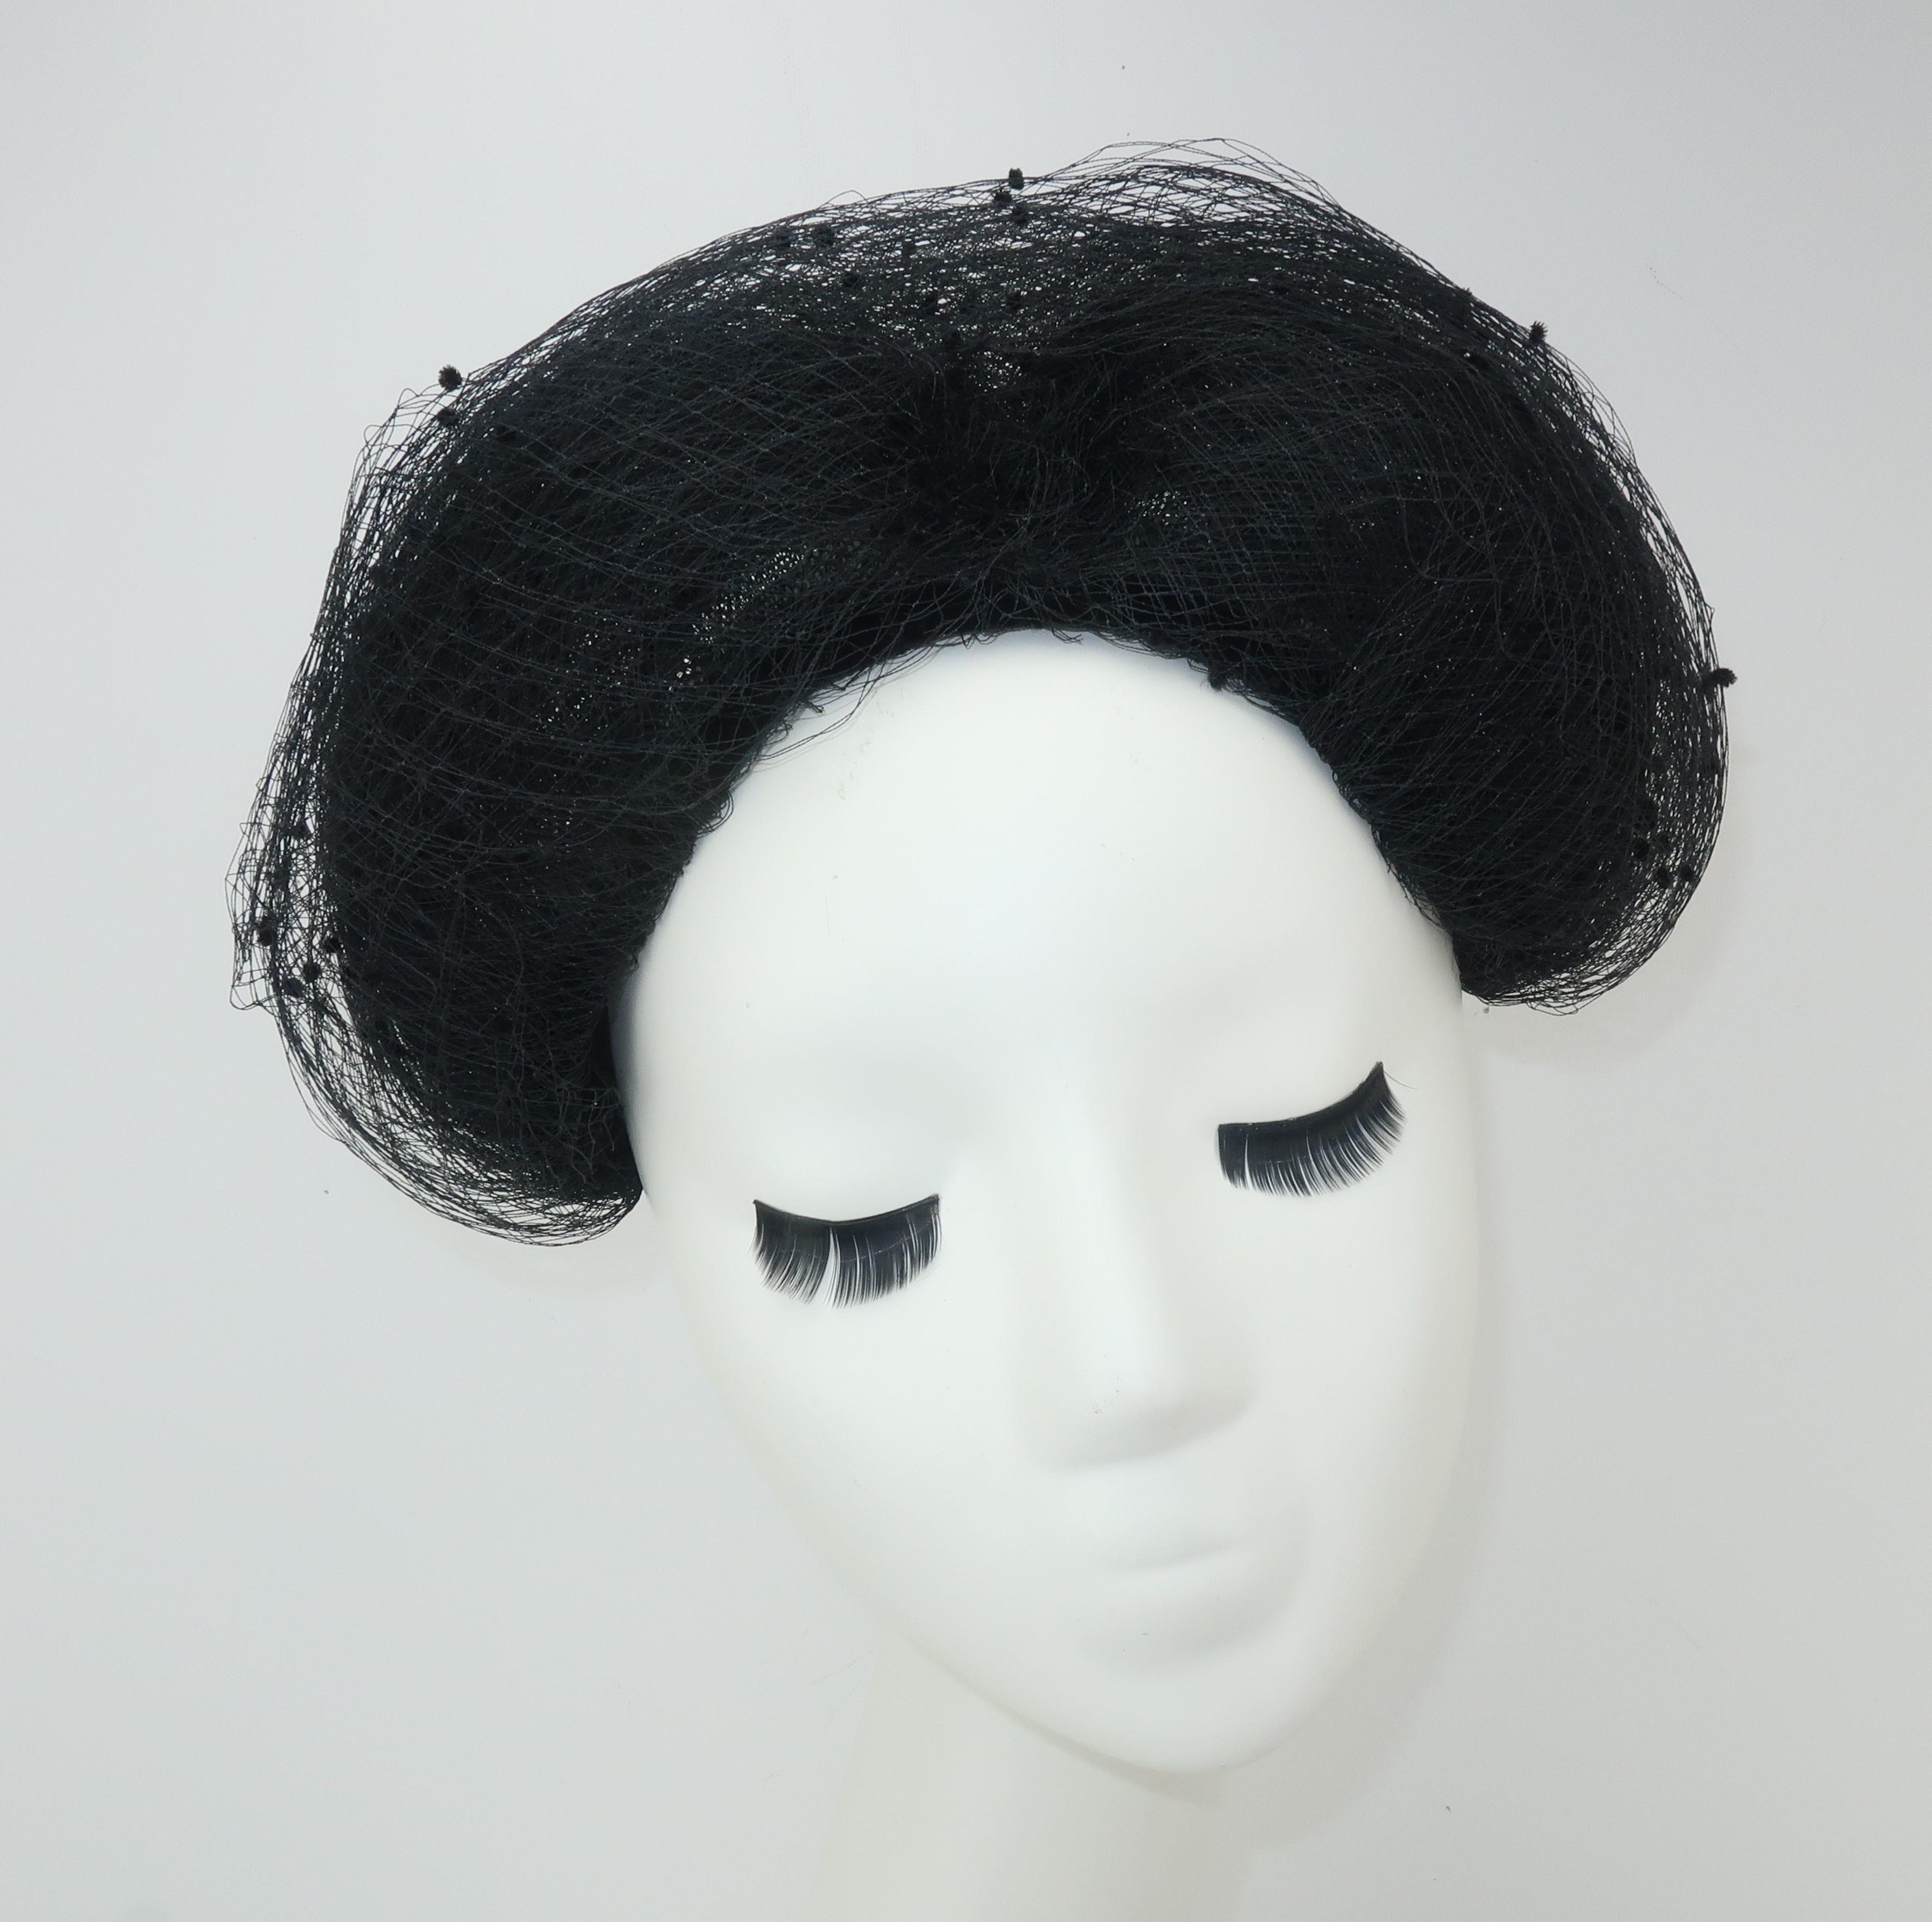 You will have loads of fun with this C.1950 fascinator hat constructed with a black wired net armature and embellished with swirls of swiss dot netting.  The unusual shape conjures up images of everything from a Geisha wig to a matador's hat and